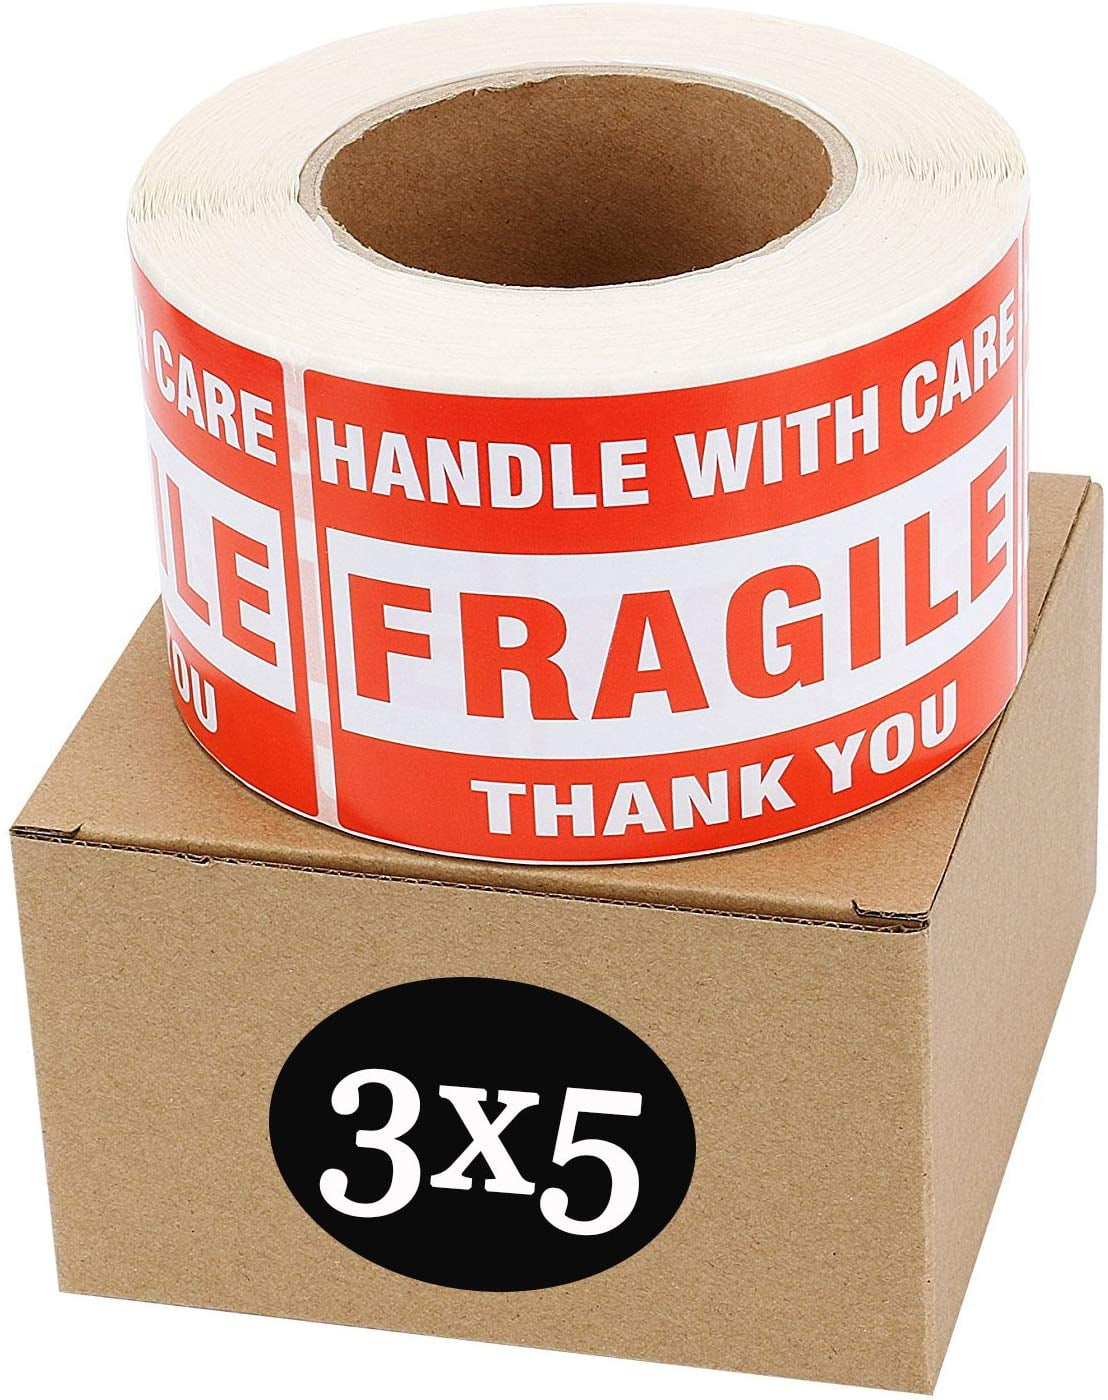 1" x 3" /300 Labels 10 Rolls OPEN HERE Handle w/ Care Shipping Stickers 